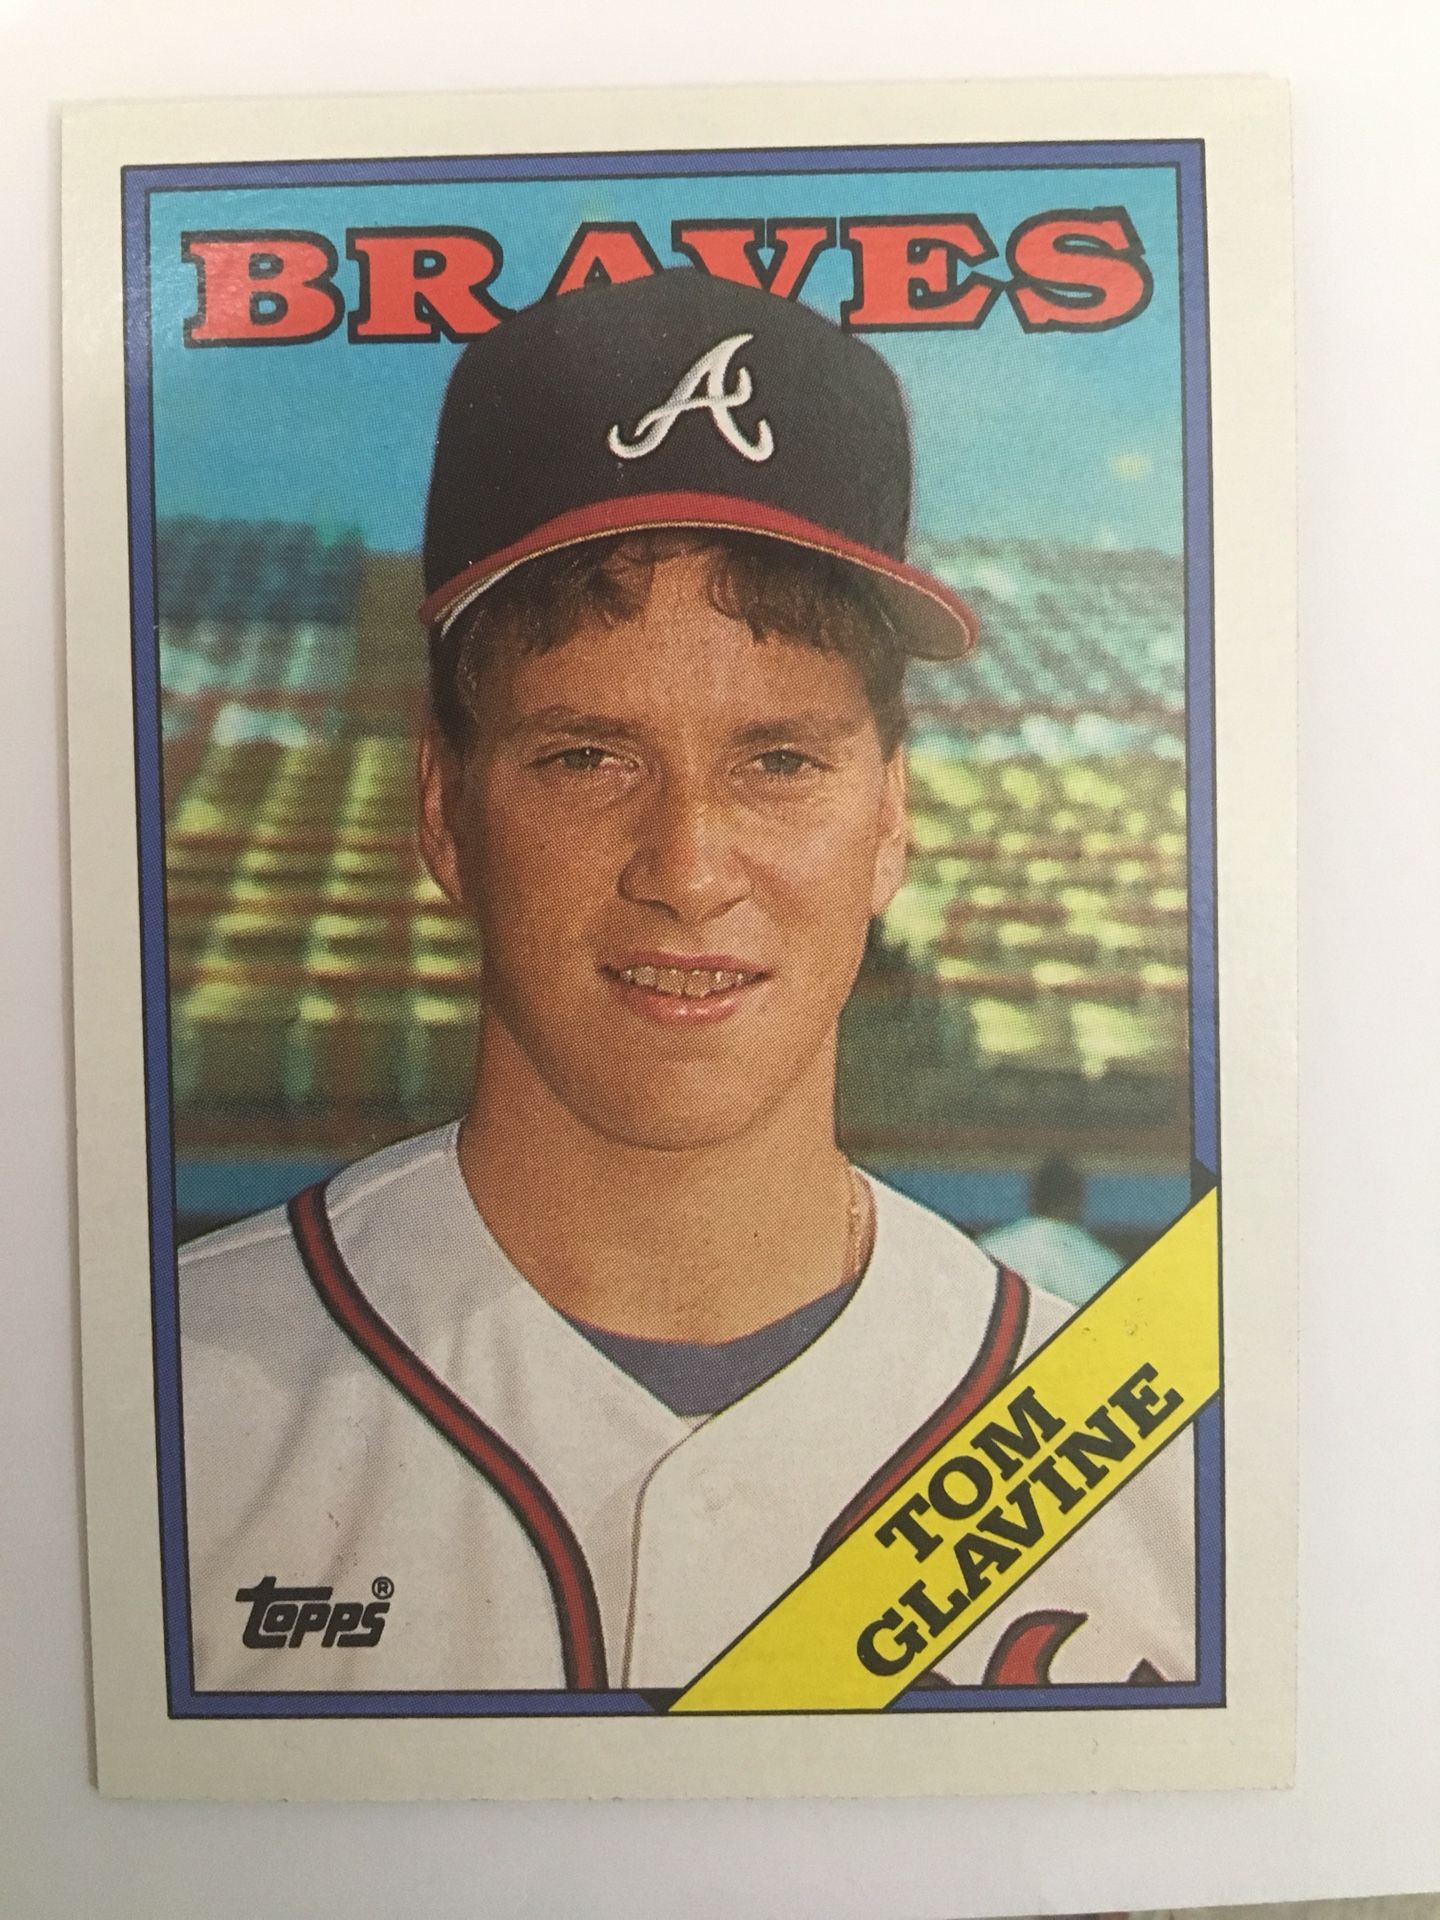 Rare and Sought After TOM GLAVINE Topps Baseball Card